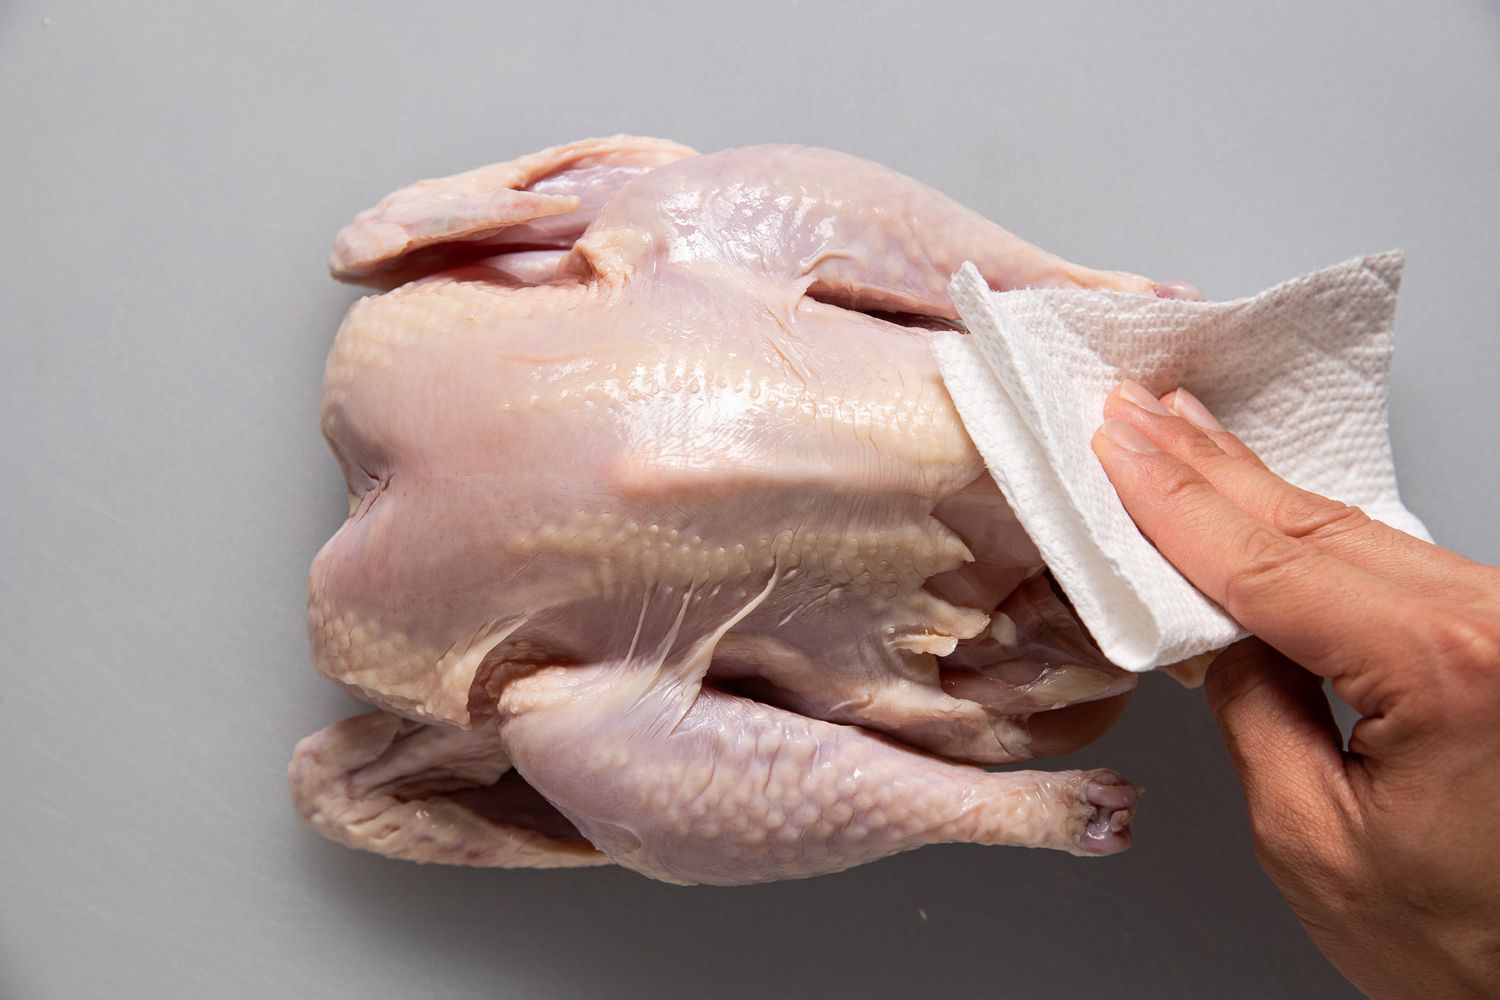 Paper towel use to remove excess moisture from whole chicken for chicken roast recipe 